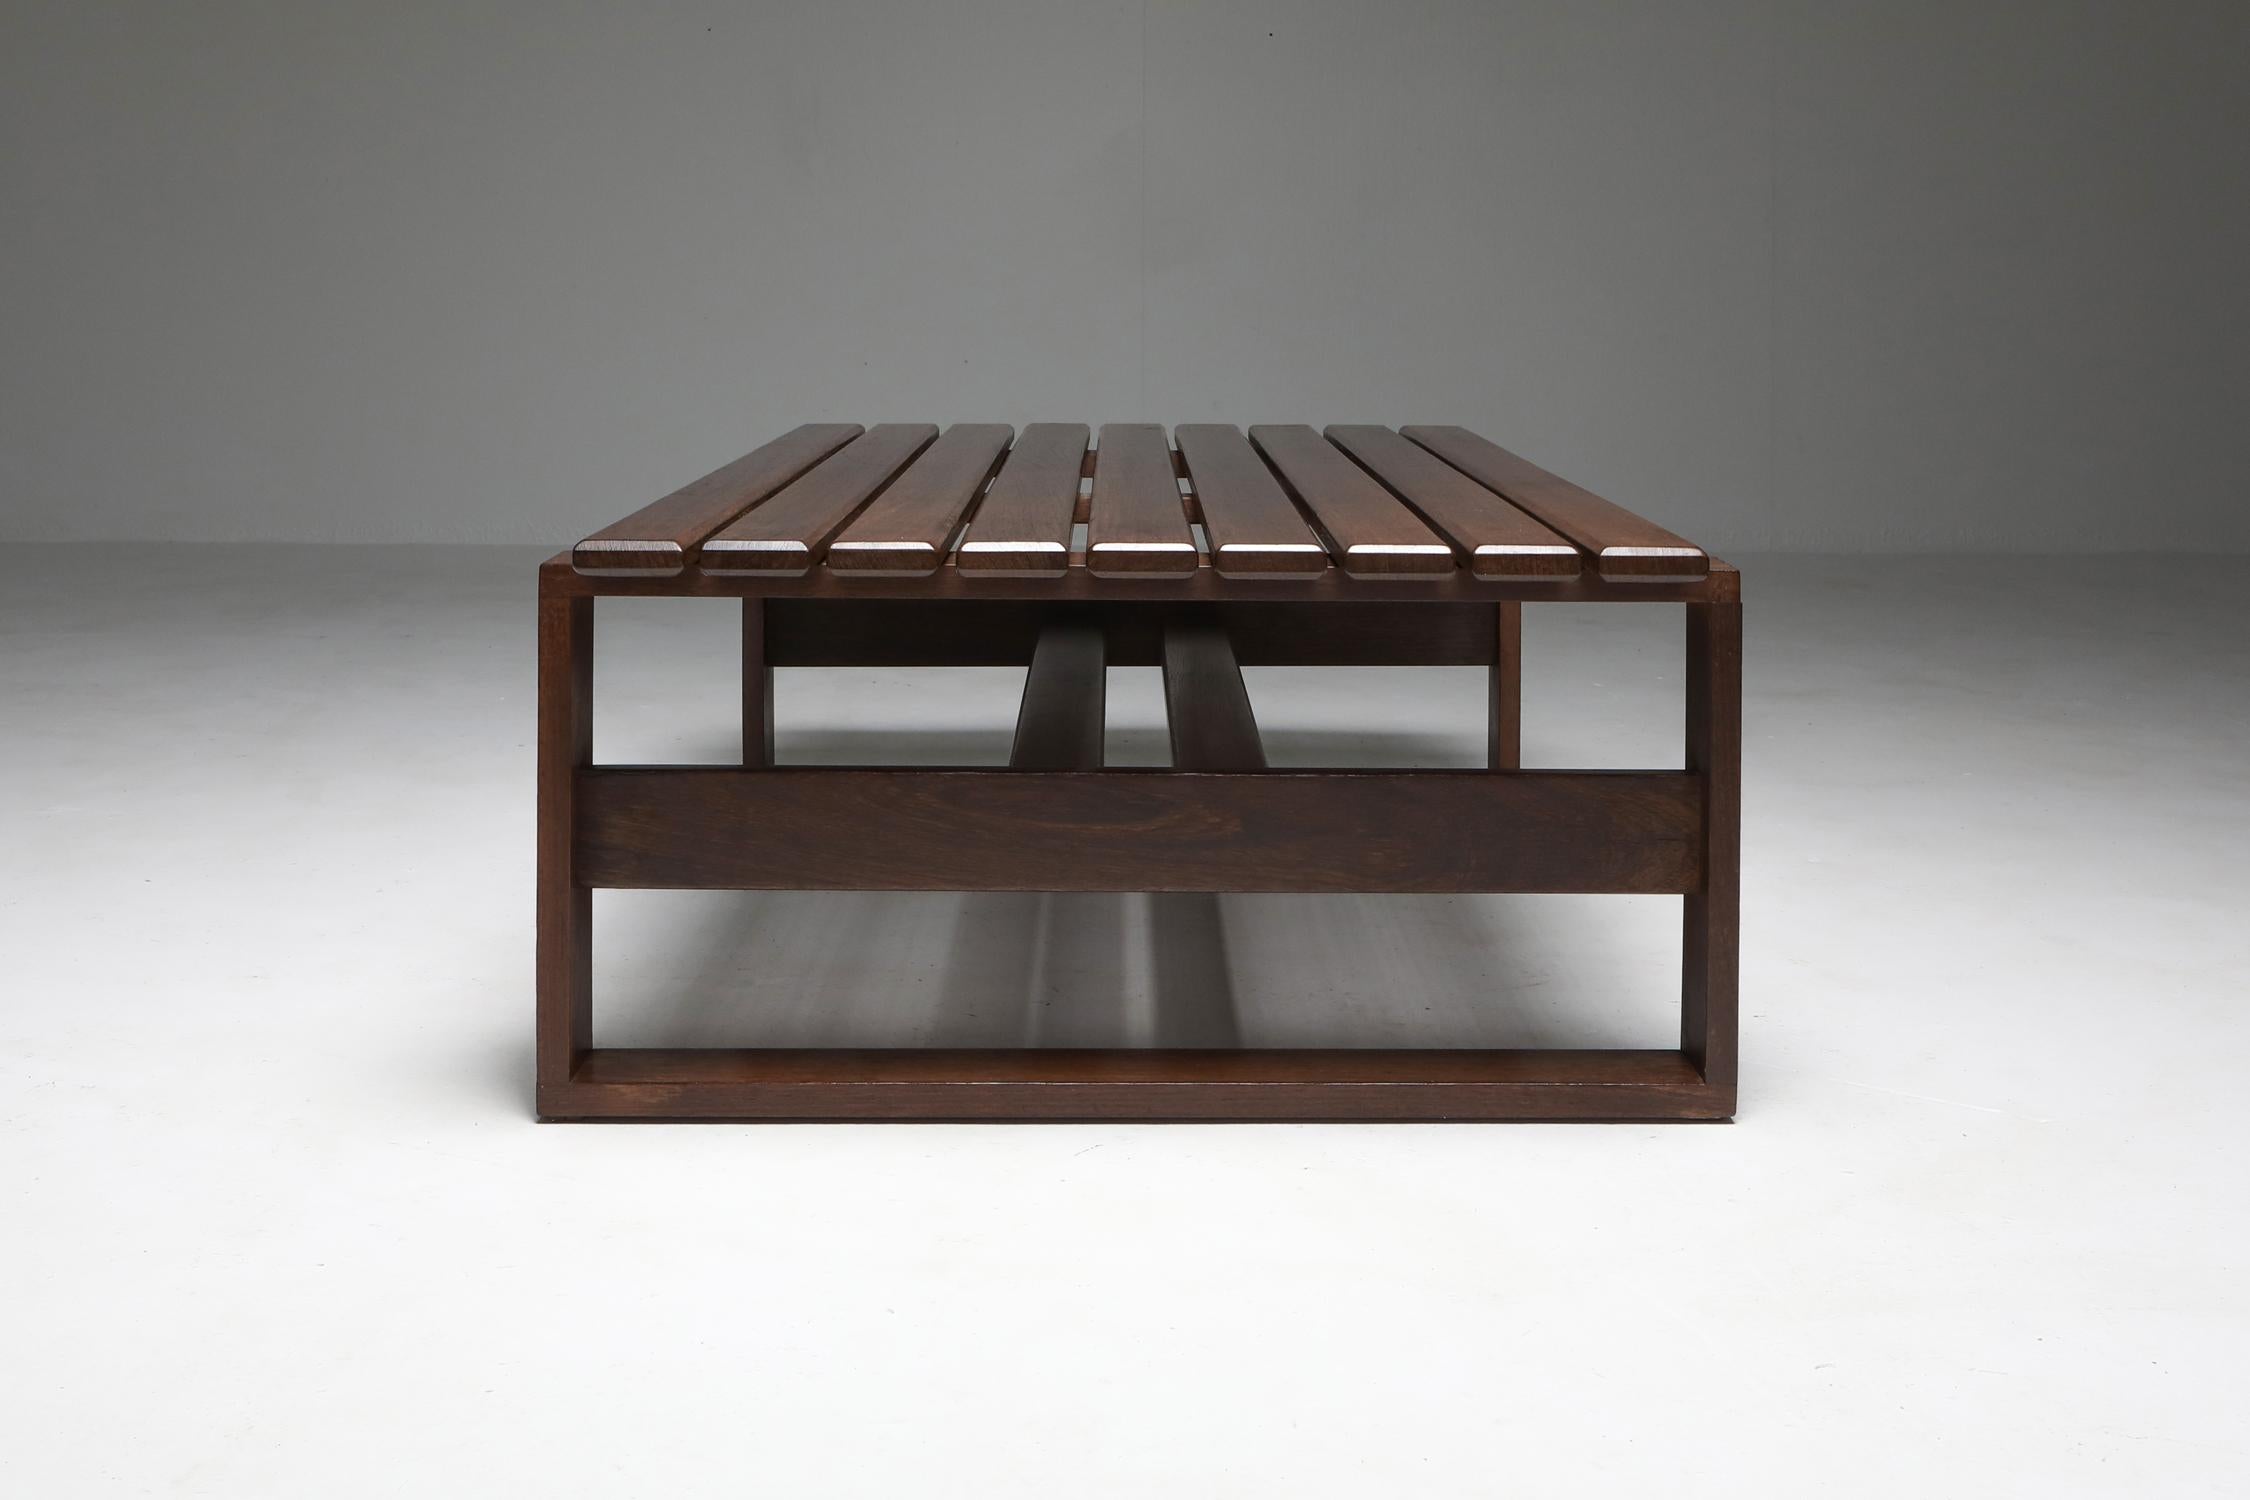 Wenge bench, Walter Anthonis, Dutch 1960s

Solid wenge piece which could act as both coffee table and bench.
Beautiful joints.
Would fit as well in a Minimalist modern decor as in a more wabi sabi Axel Vervoordt inspired interior.

 